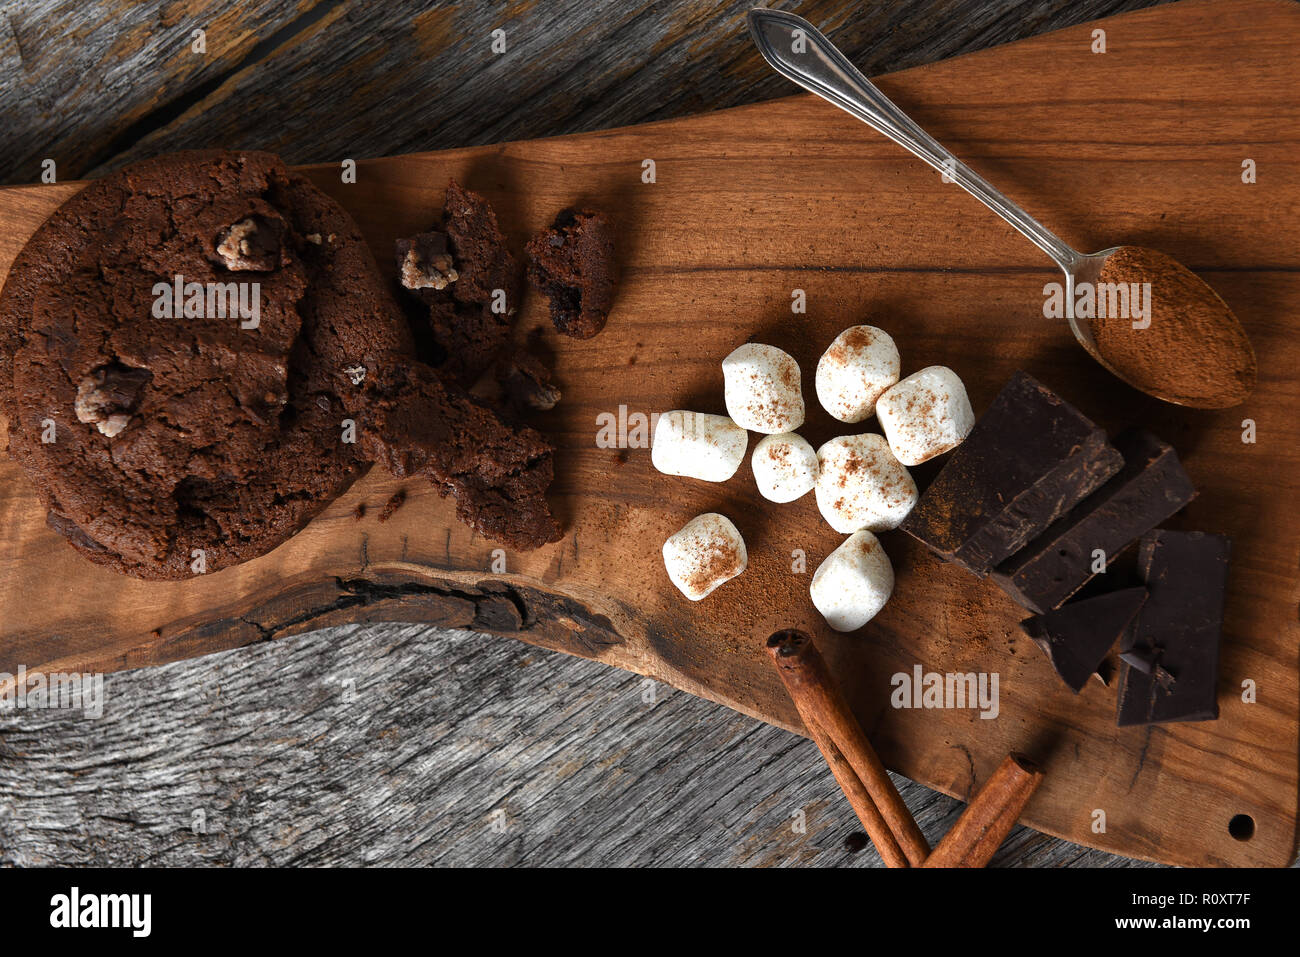 Overhead shot of a cutting board with chocolate chunks cinnamon sticks and cookies. Stock Photo